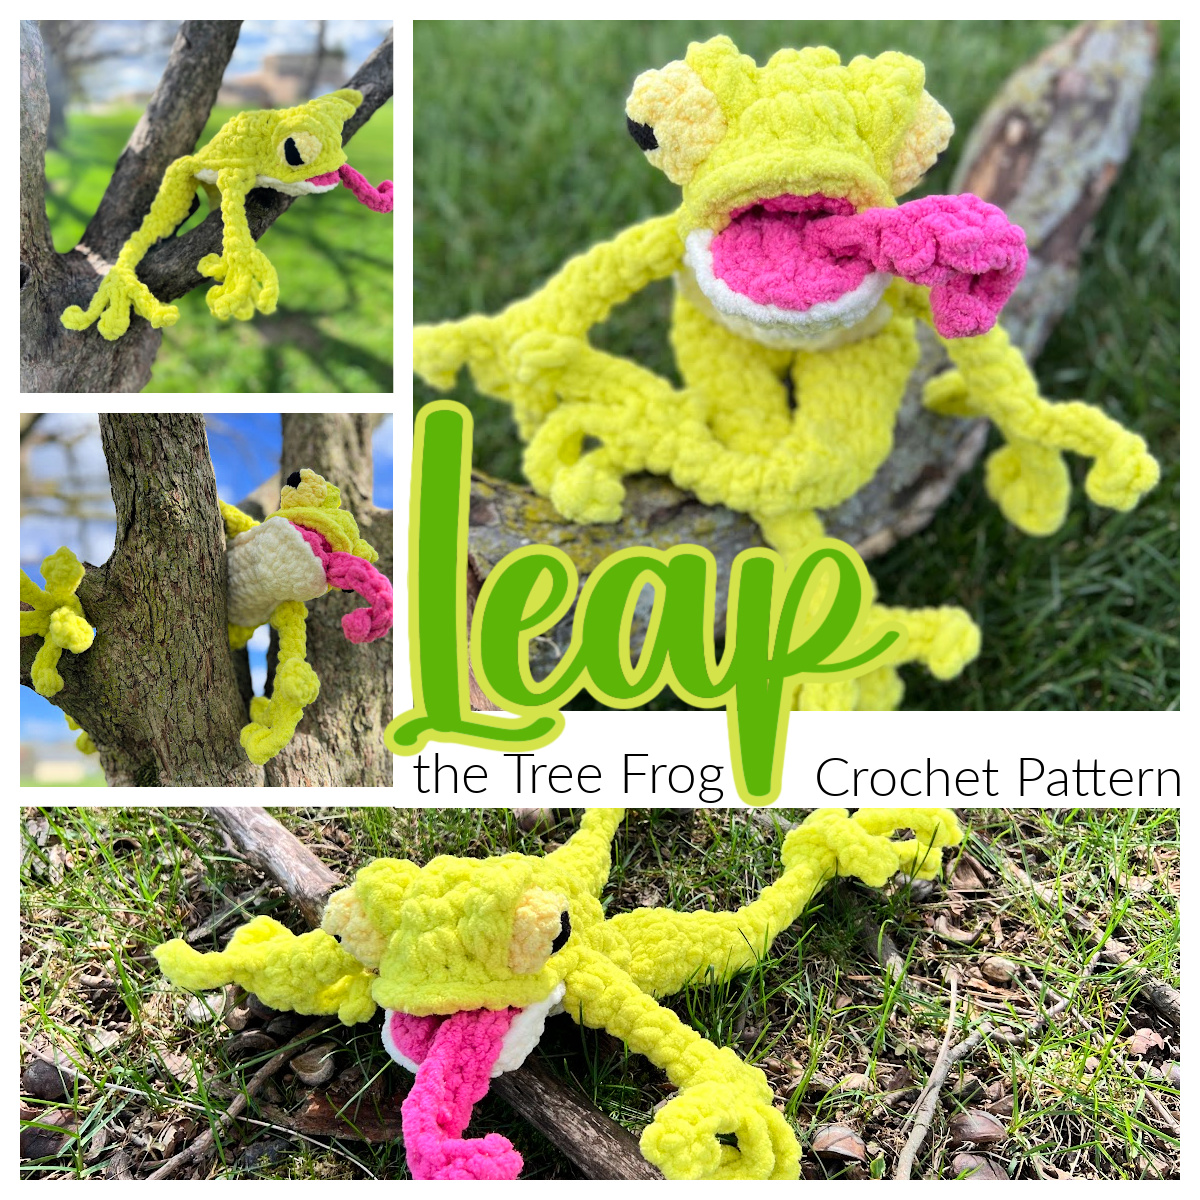 A collage of images features a crochet pattern for a yellow and green tree frog with a pink tongue. The frog is showcased hanging on branches and lying on grass. Text overlaid reads "Leap the Tree Frog Stuffie Crochet Pattern. -Marly Bird